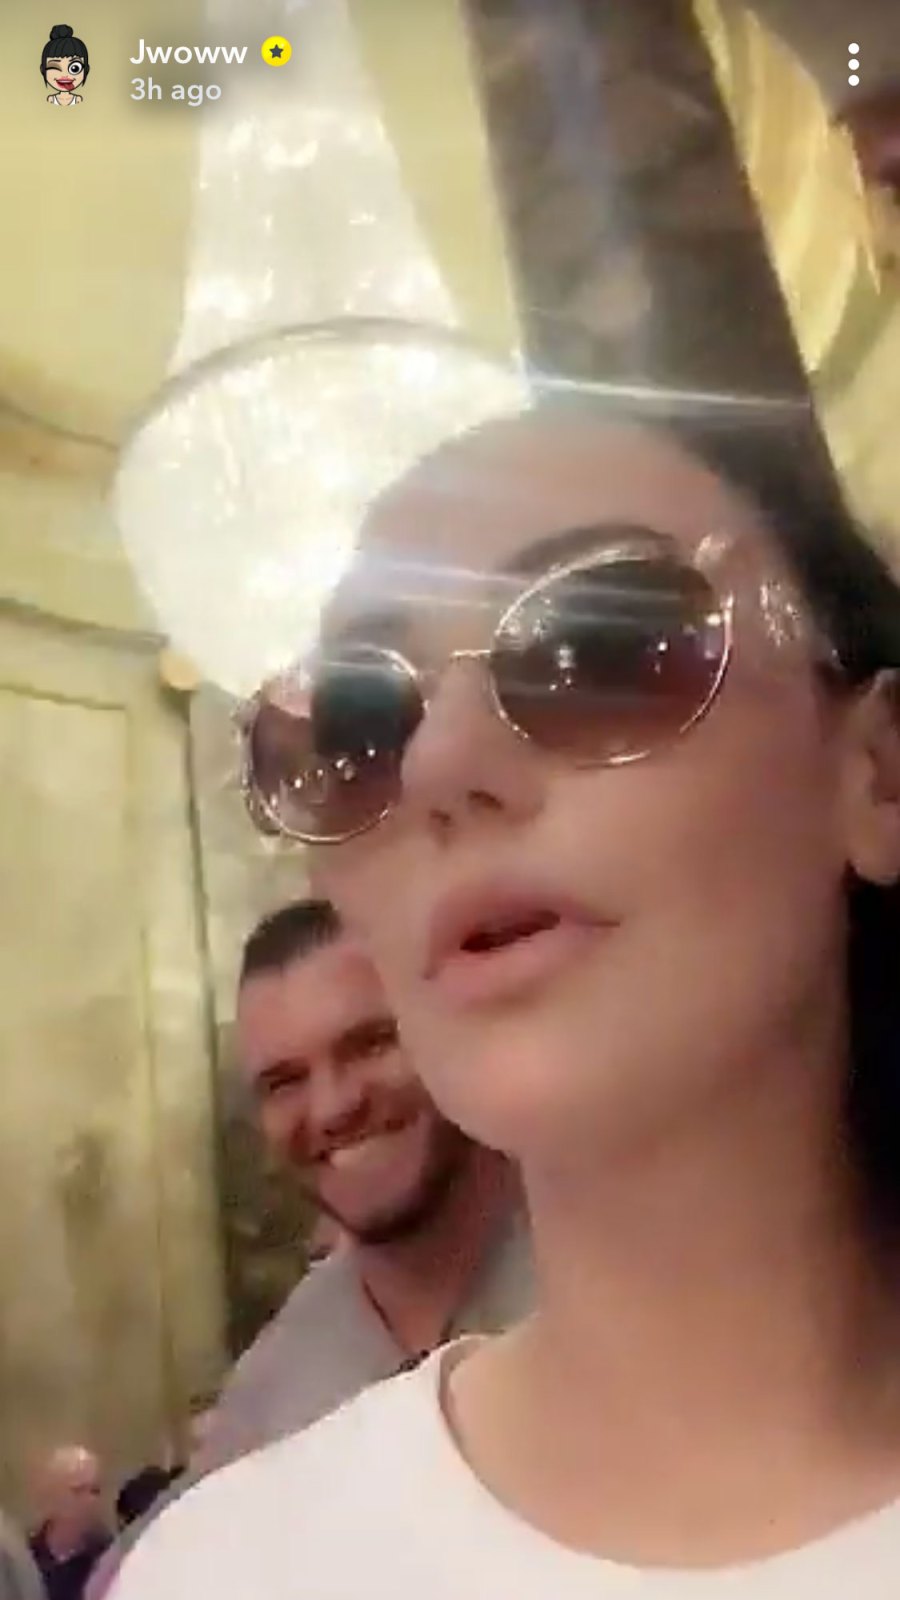 JWoww’s ‘Jersey Shore’ Pals Show Support for Her New Boyfriend As They Visit Harry Potter World SnapChat